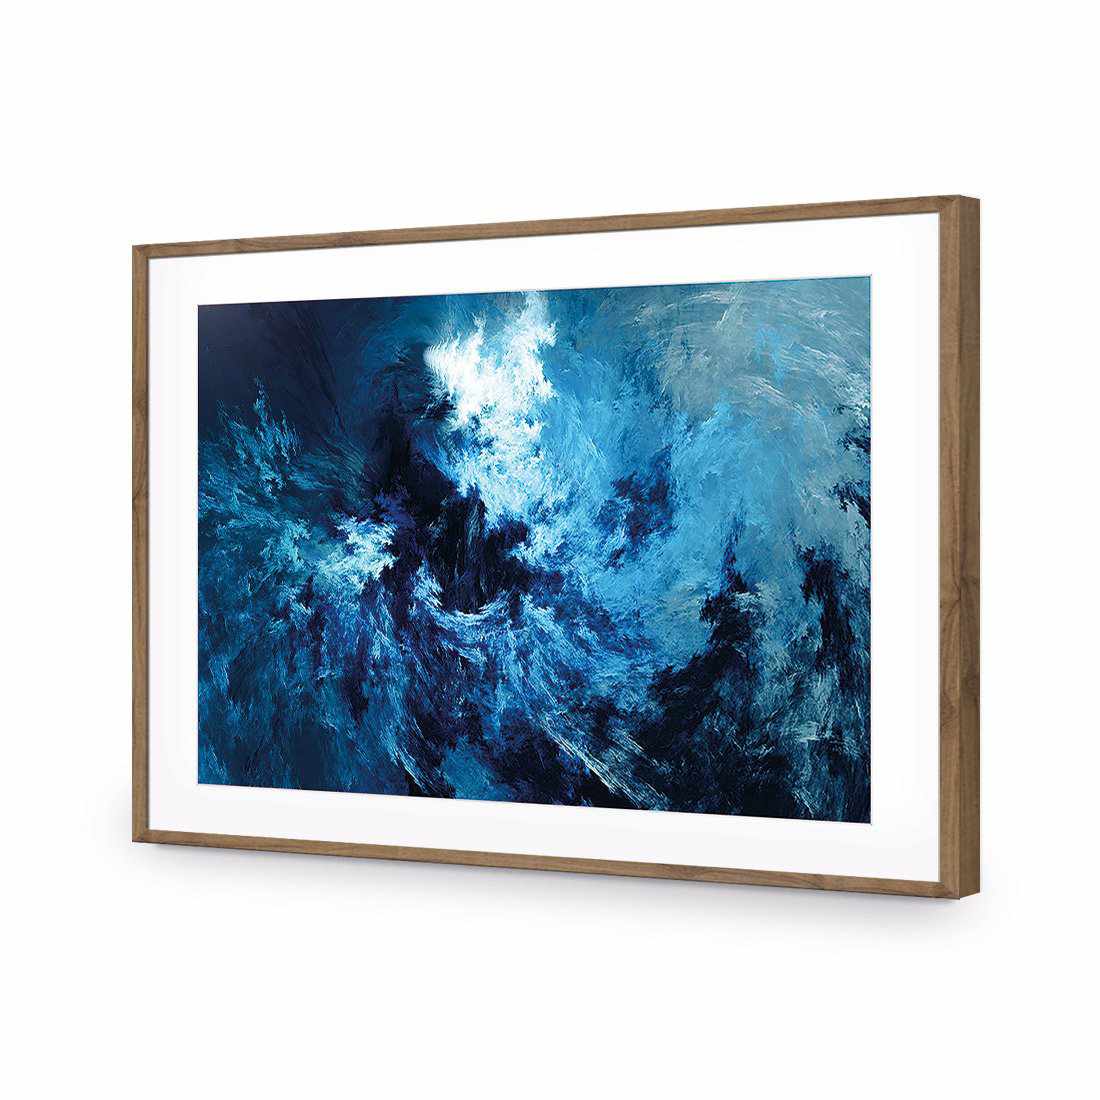 Into the Storm-Acrylic-Wall Art Design-With Border-Acrylic - Natural Frame-45x30cm-Wall Art Designs